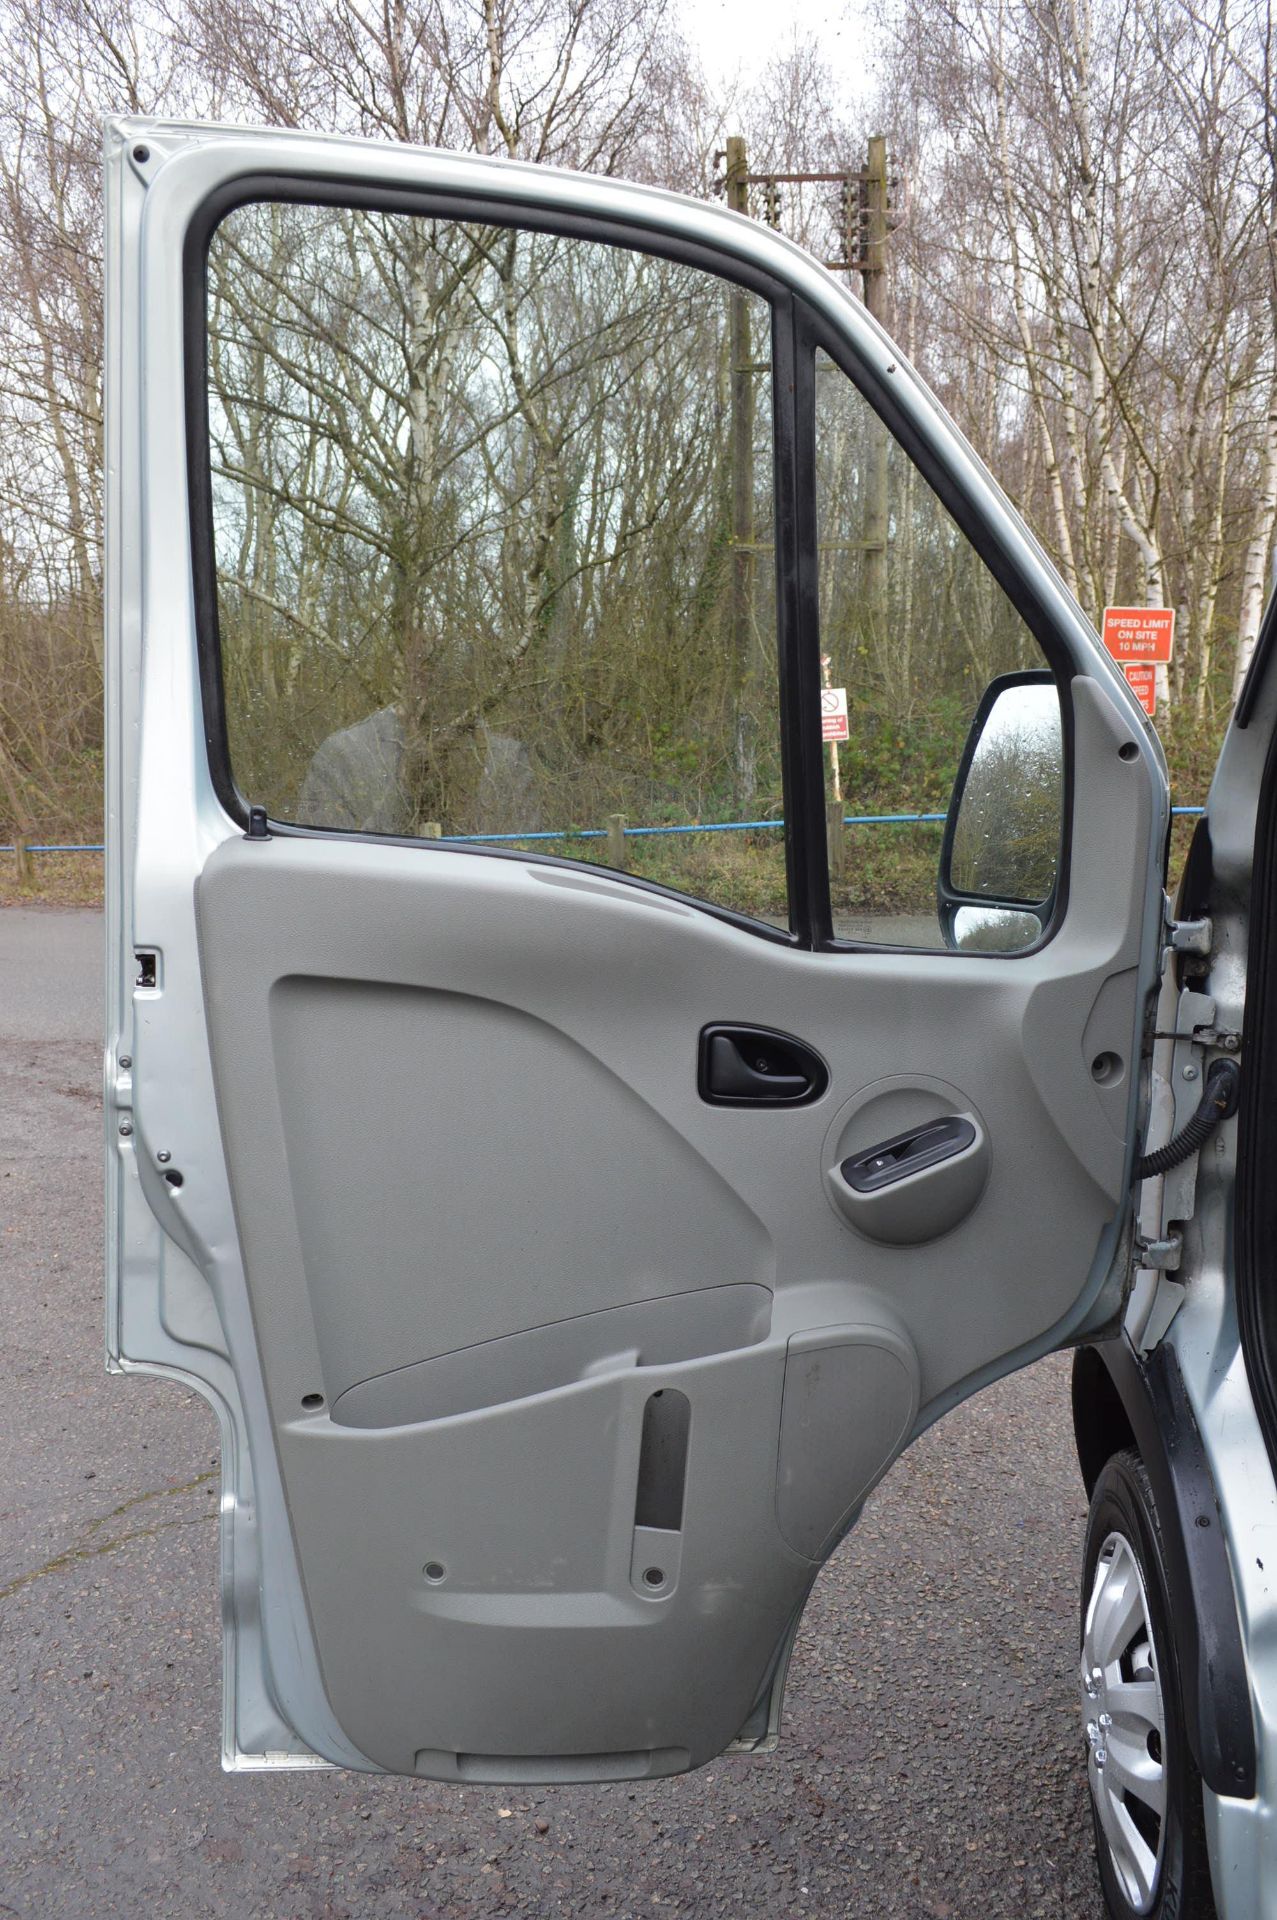 SUPER RARE 2010 RENAULT MASTER SL28 DCI 100 AUTO 2.5 DIESEL GREY DISABLED MINIBUS WITH RICON LIFT - Image 21 of 43